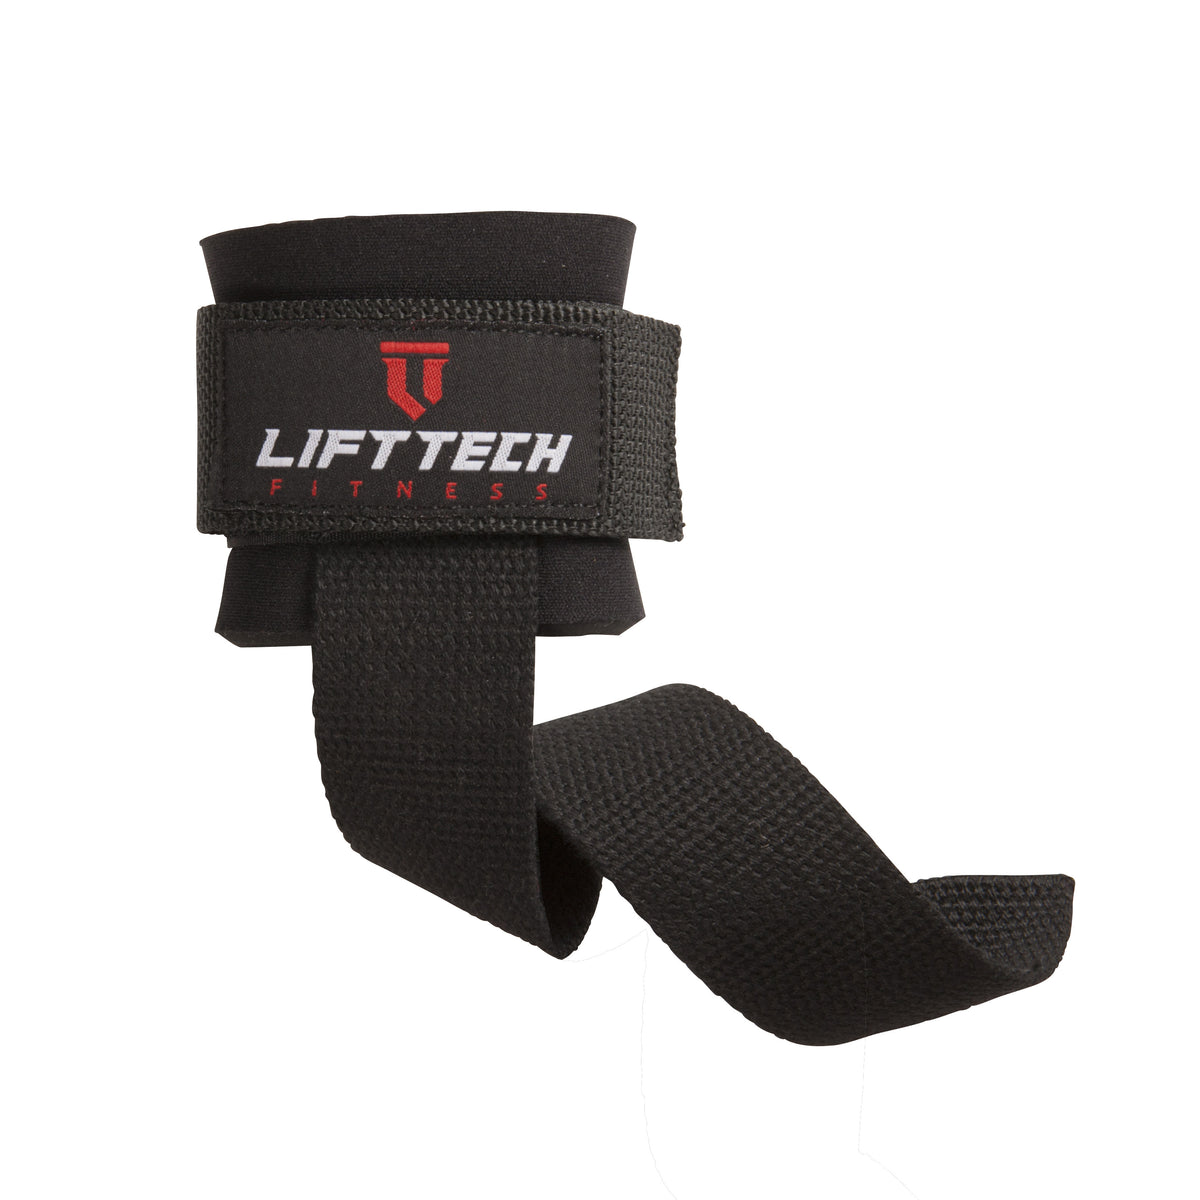 NEO WRIST SUPPORT LIFTING STRAPS – Lift Tech Fitness